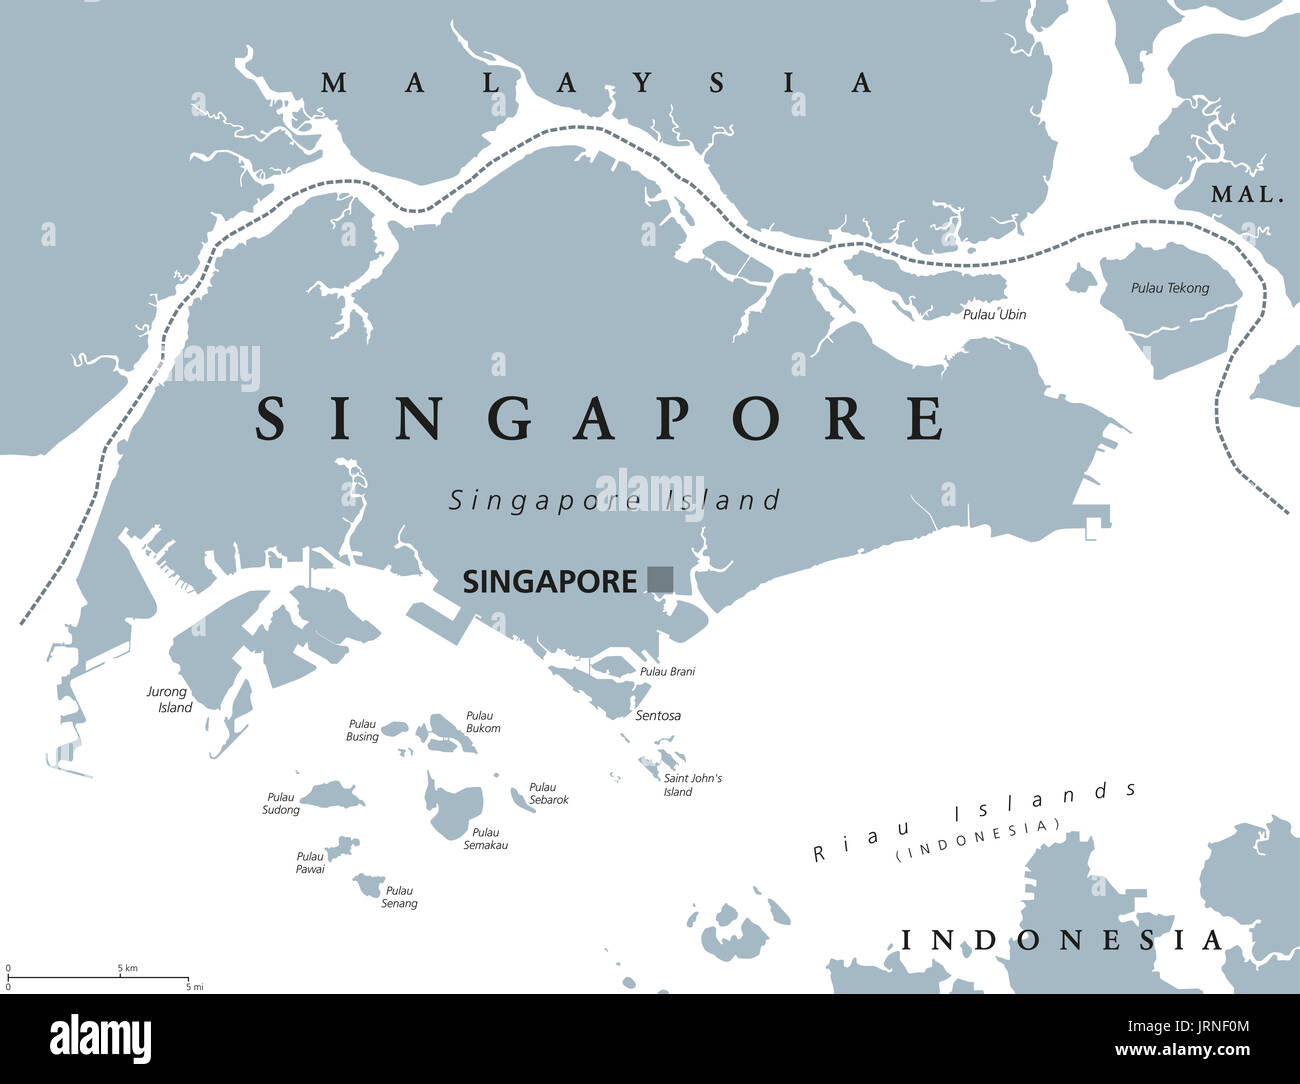 Singapore political map with English labeling. Republic and sovereign state in Southeast Asia. Sometimes Lion City, Garden City or Little Red Dot. Stock Photo